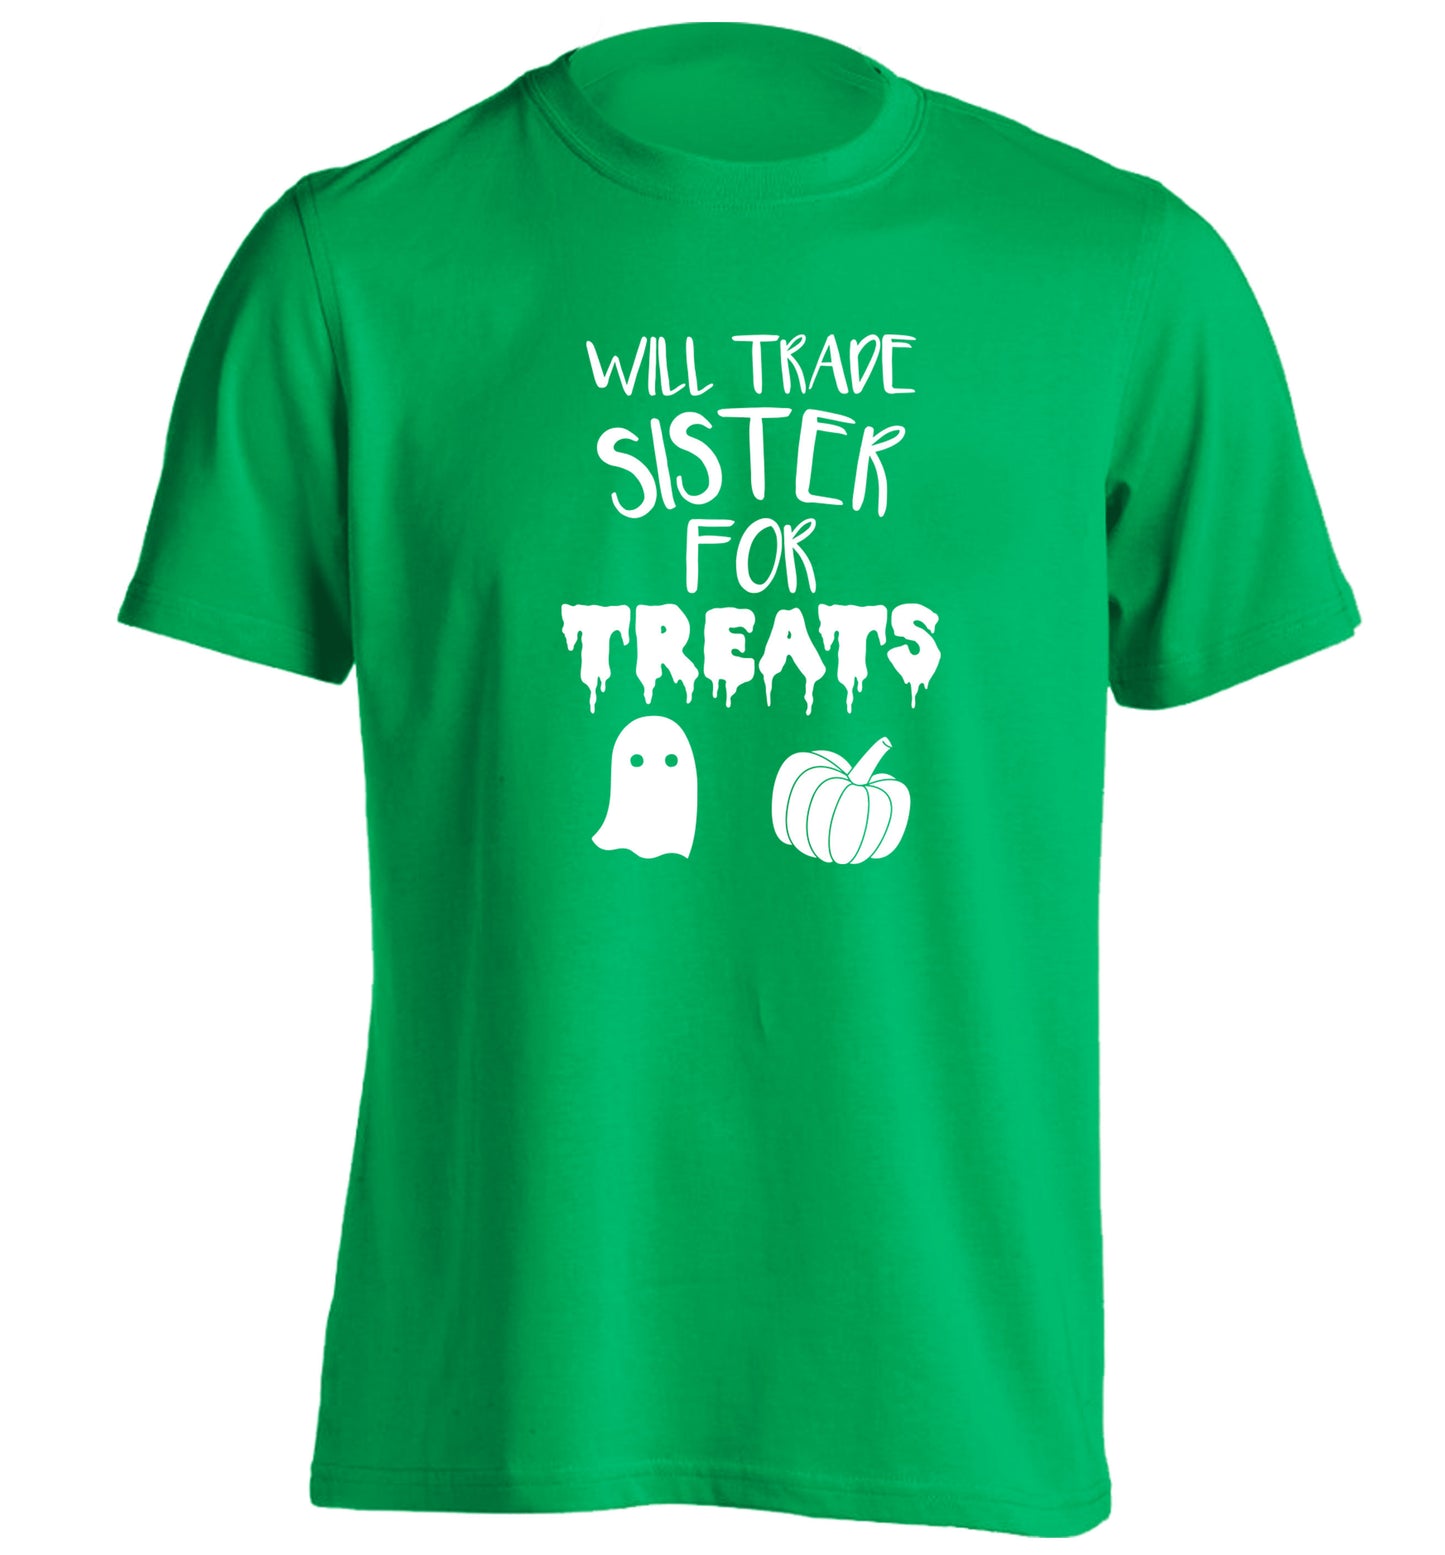 Will trade sister for treats adults unisex green Tshirt 2XL